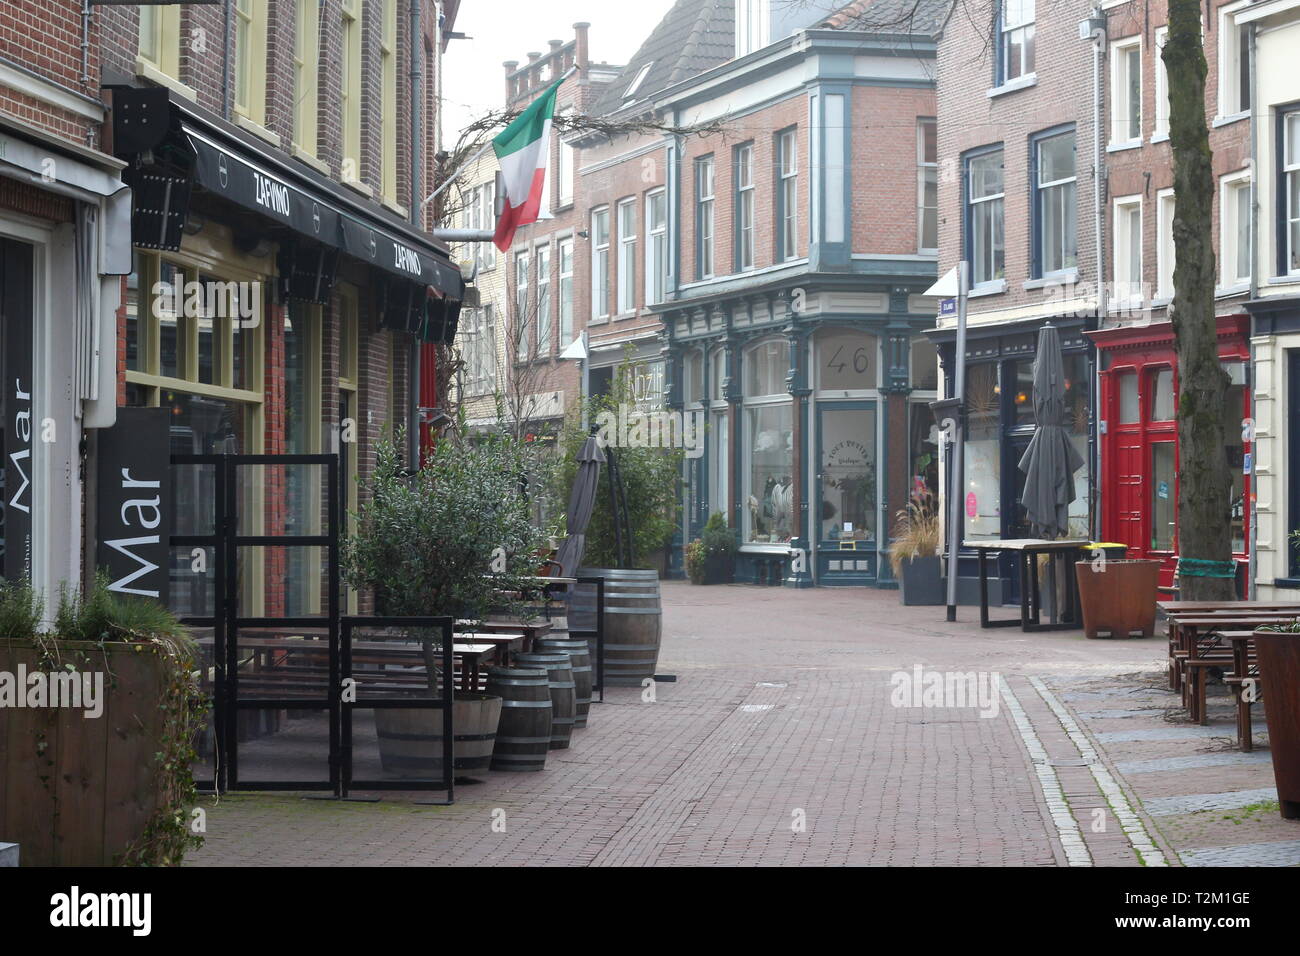 ARNHEM, NETHERLANDS - MARCH 22, 2019: Nice and picturesque ancient streets in the center of Arnhem, named Zwanenstraat and Kerkstraat Stock Photo